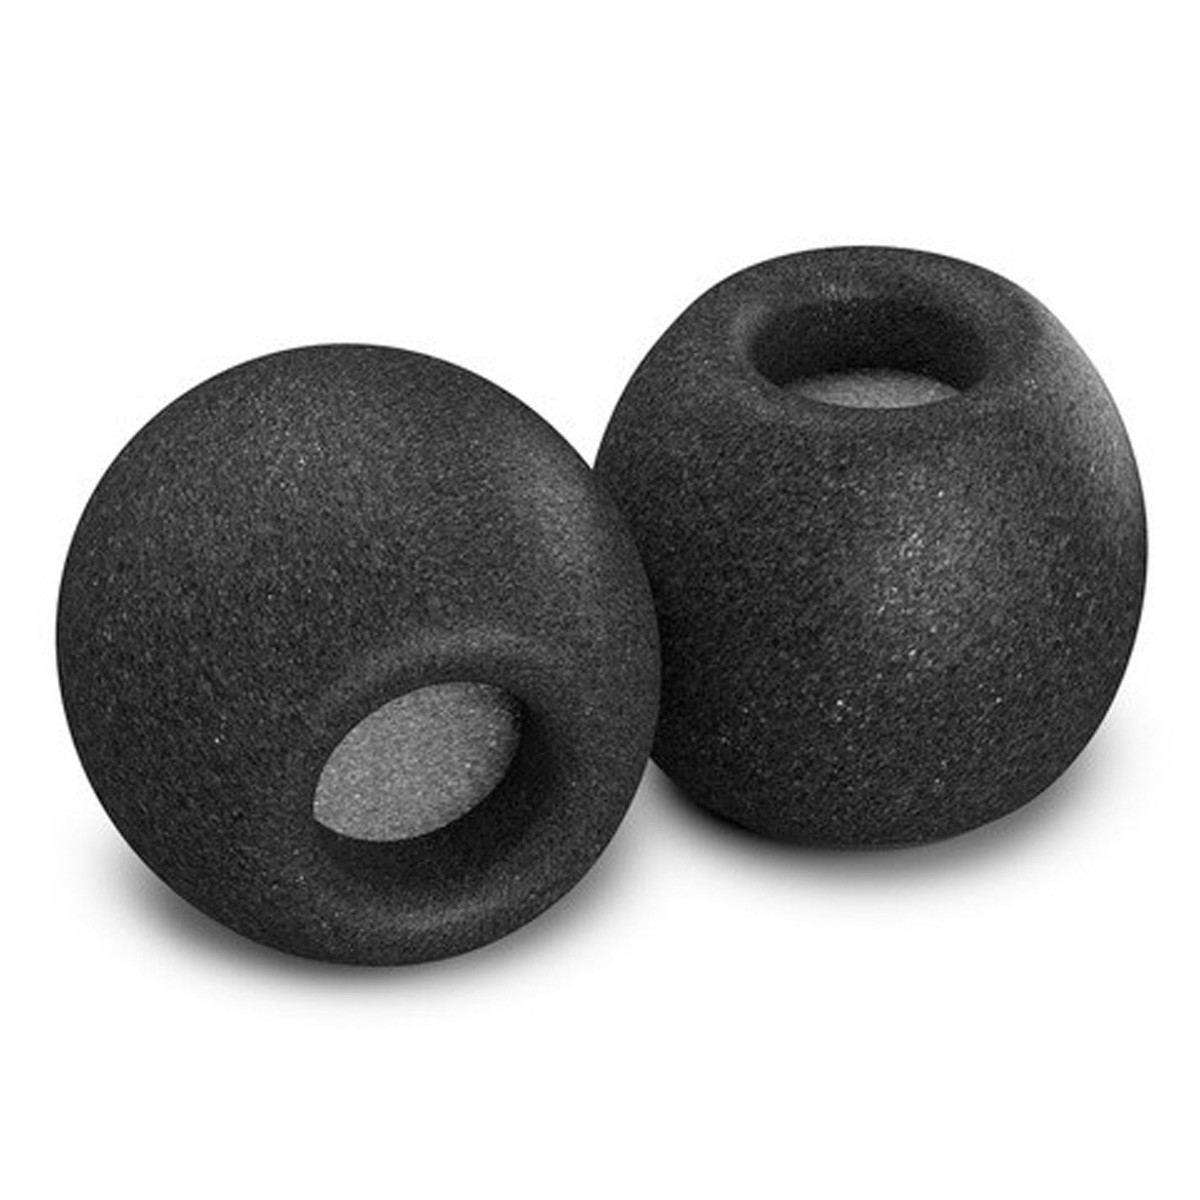 COMPLY AUDIO PRO Set of 3 Pairs of Memory Foam Eartips (M) for In-Ear Monitor